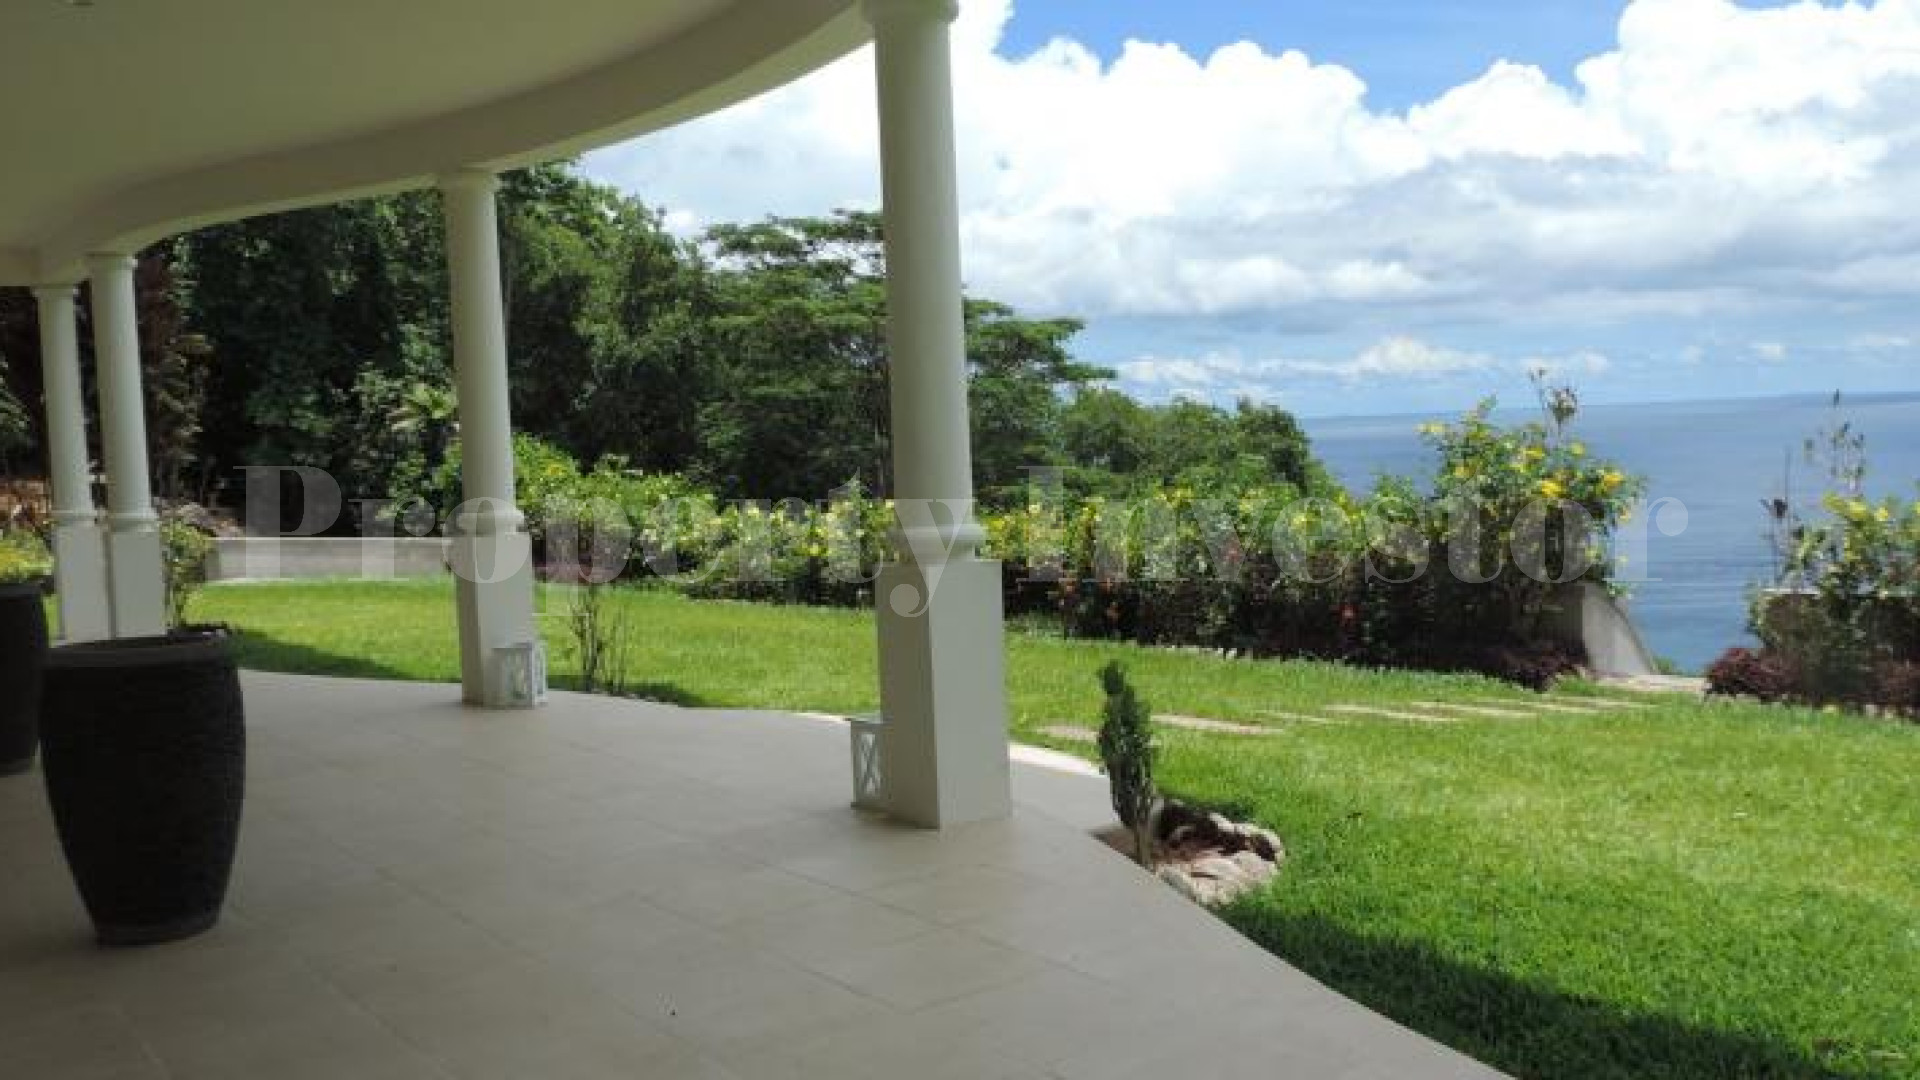 A Grand 5 Bedroom Seaview Villa with Expansive Lot for Sale in Mahé, Seychelles